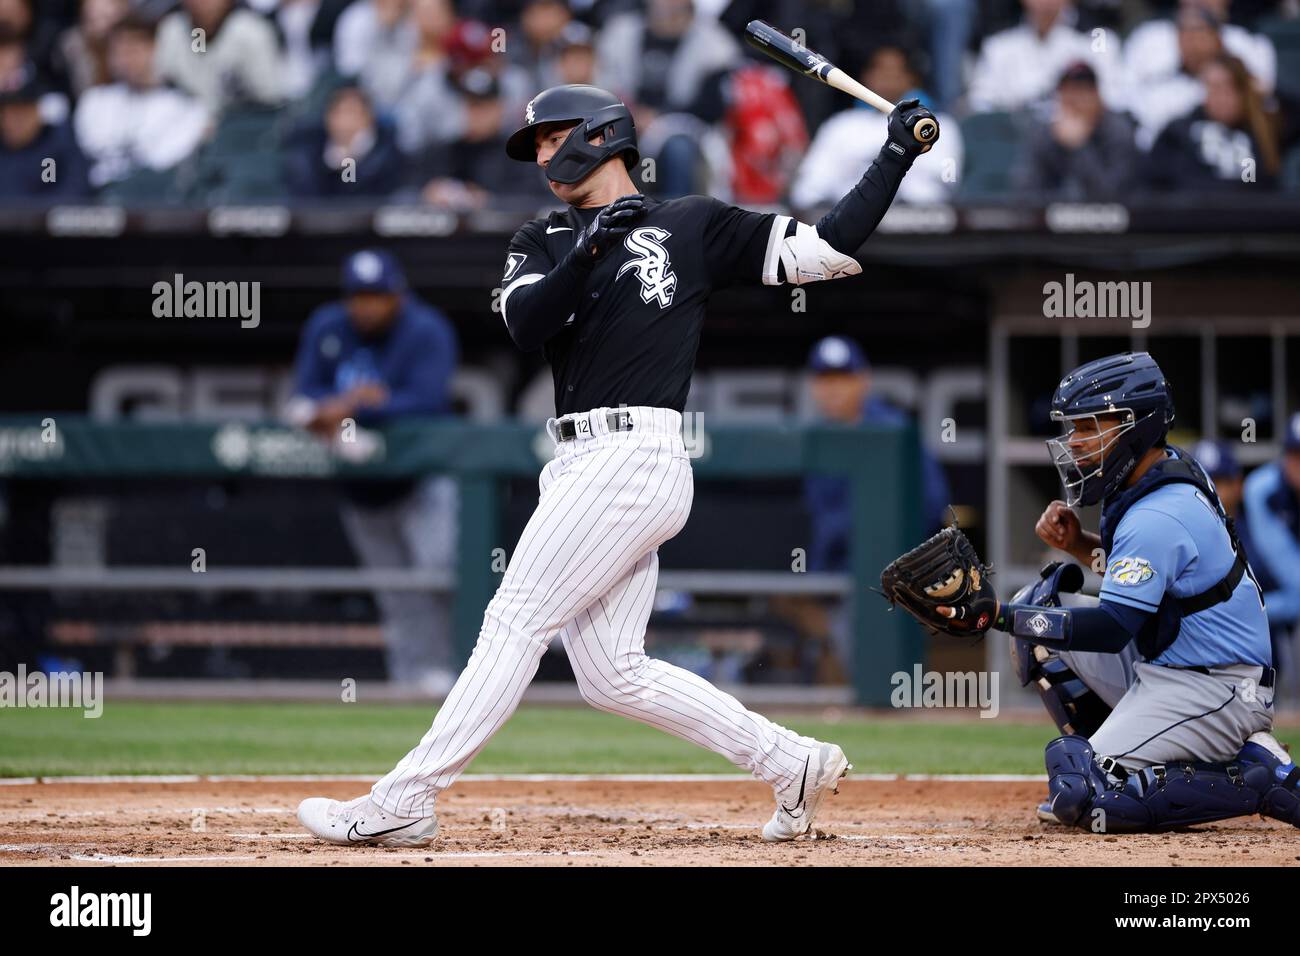 CHICAGO, IL - APRIL 29: Chicago White Sox second baseman Romy Gonzalez (12)  bats during an MLB game against the Tampa Bay Rays on April 29, 2023 at  Guaranteed Rate Field in